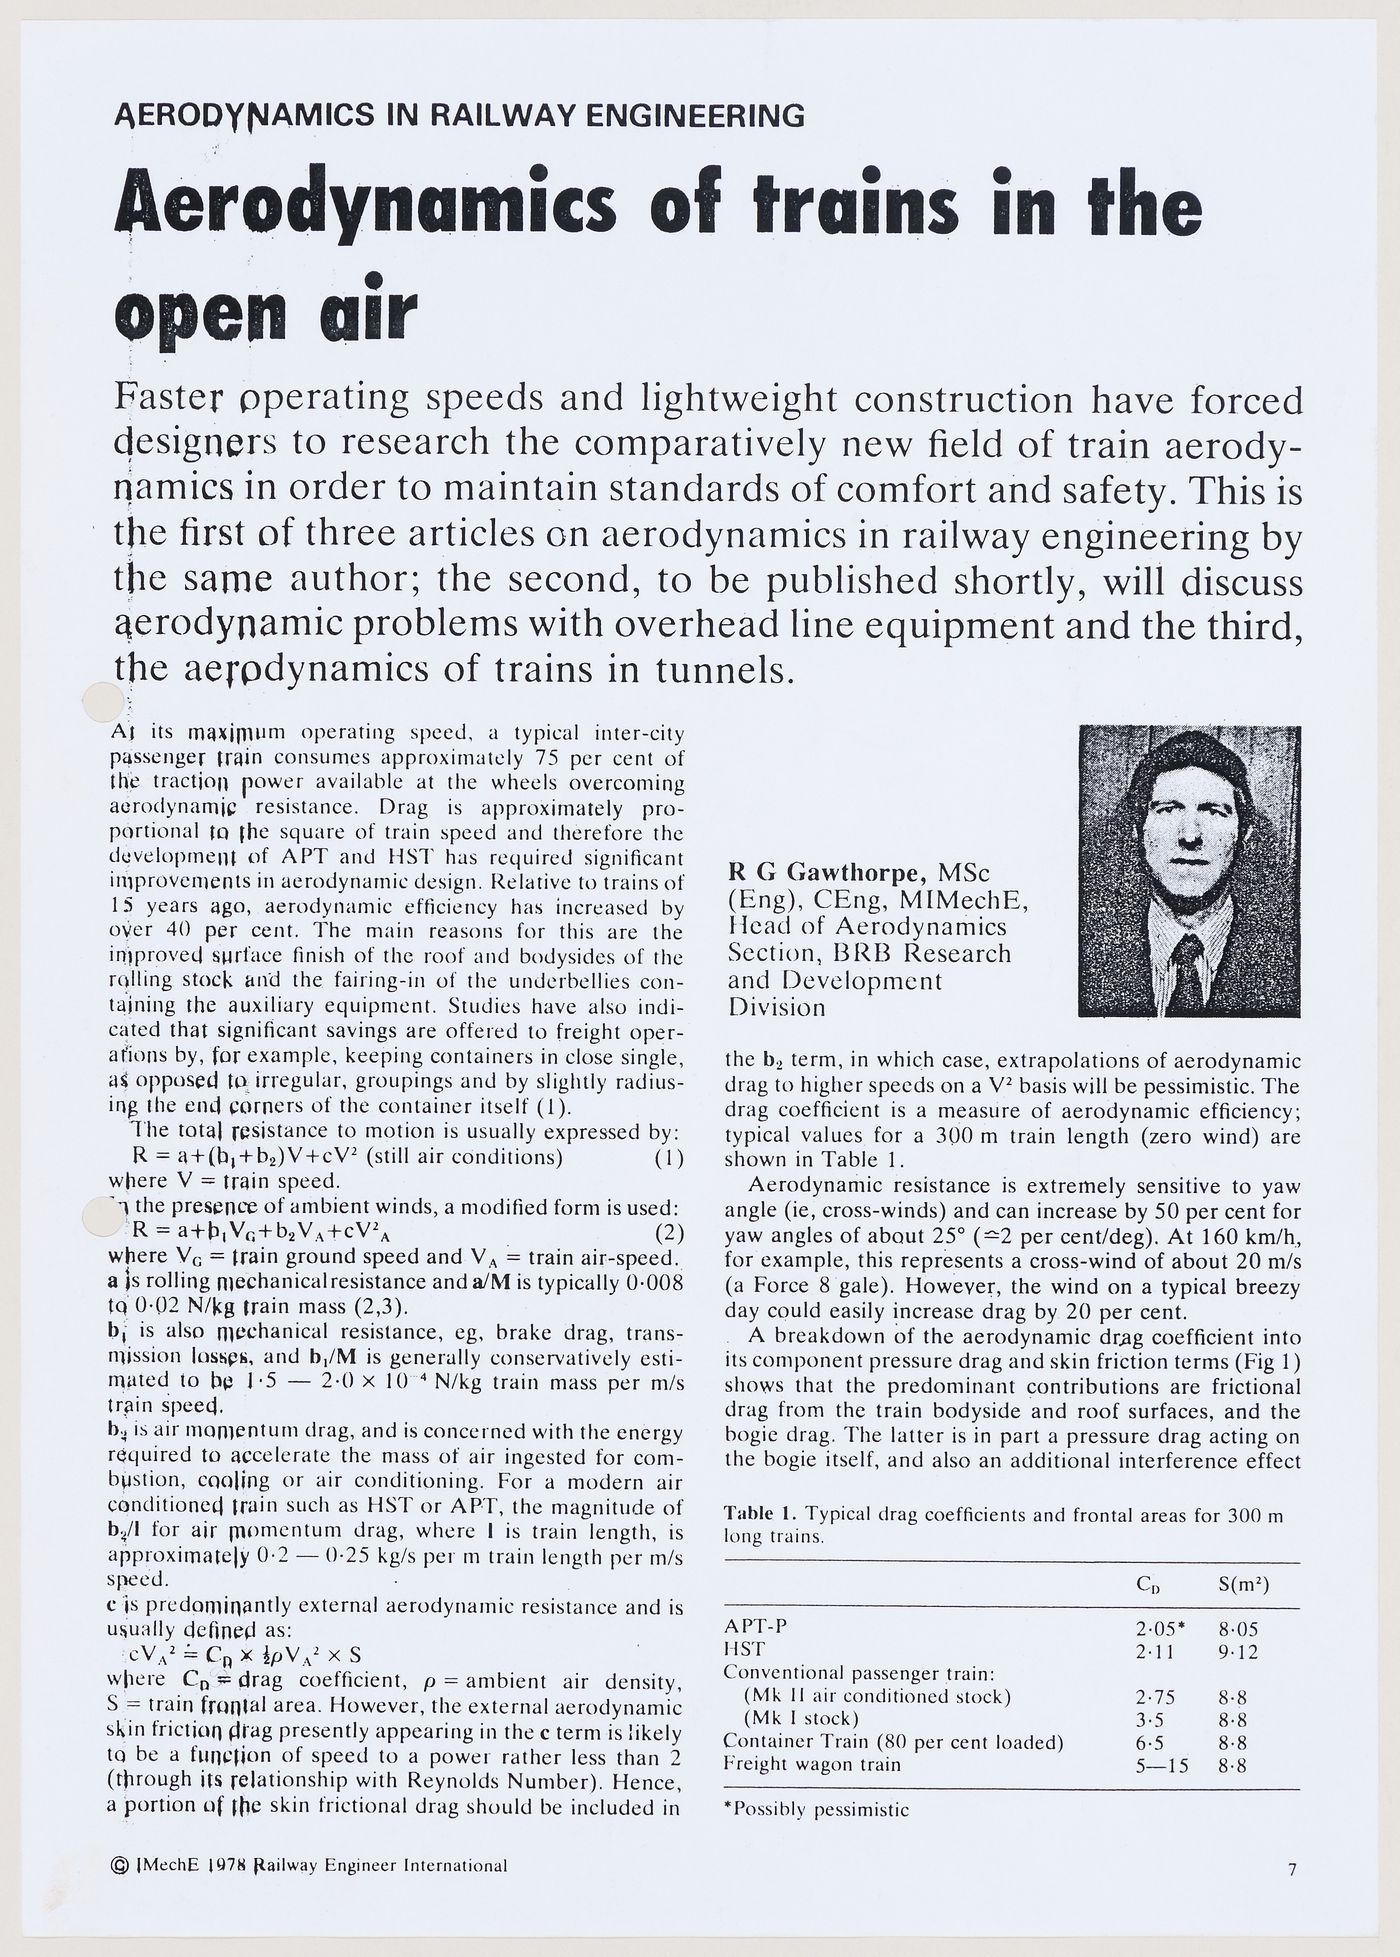 Aerodynamics of trains in the open air (page 7) (document from the IFPRI project records)